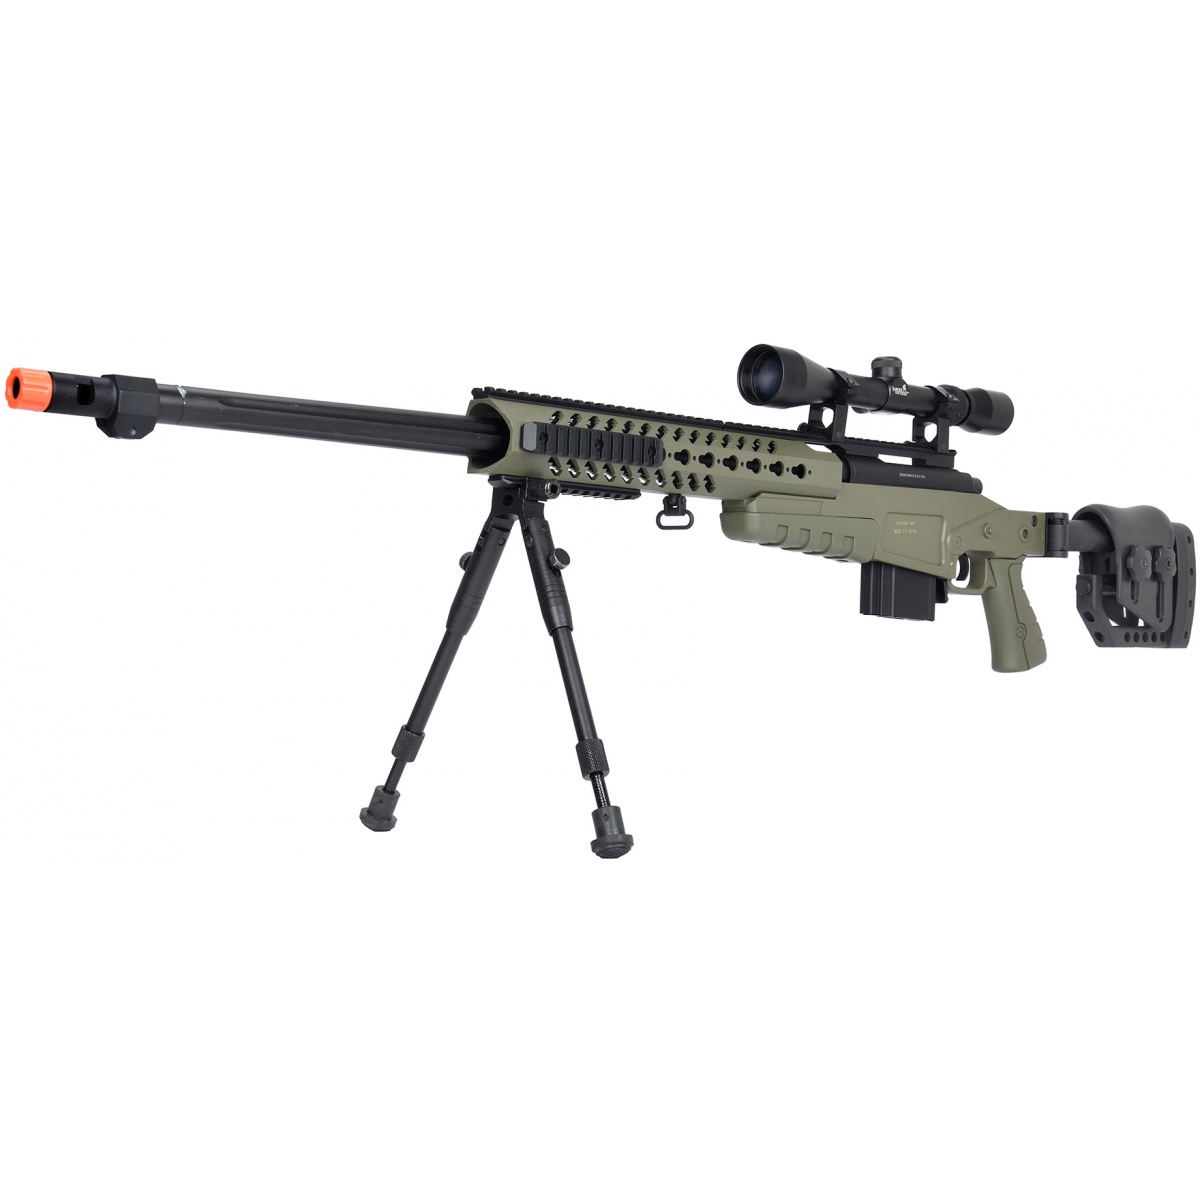 Wellfire MB4411D Bolt Action Sniper Rifle W/ Scope And Bipod OD Green 